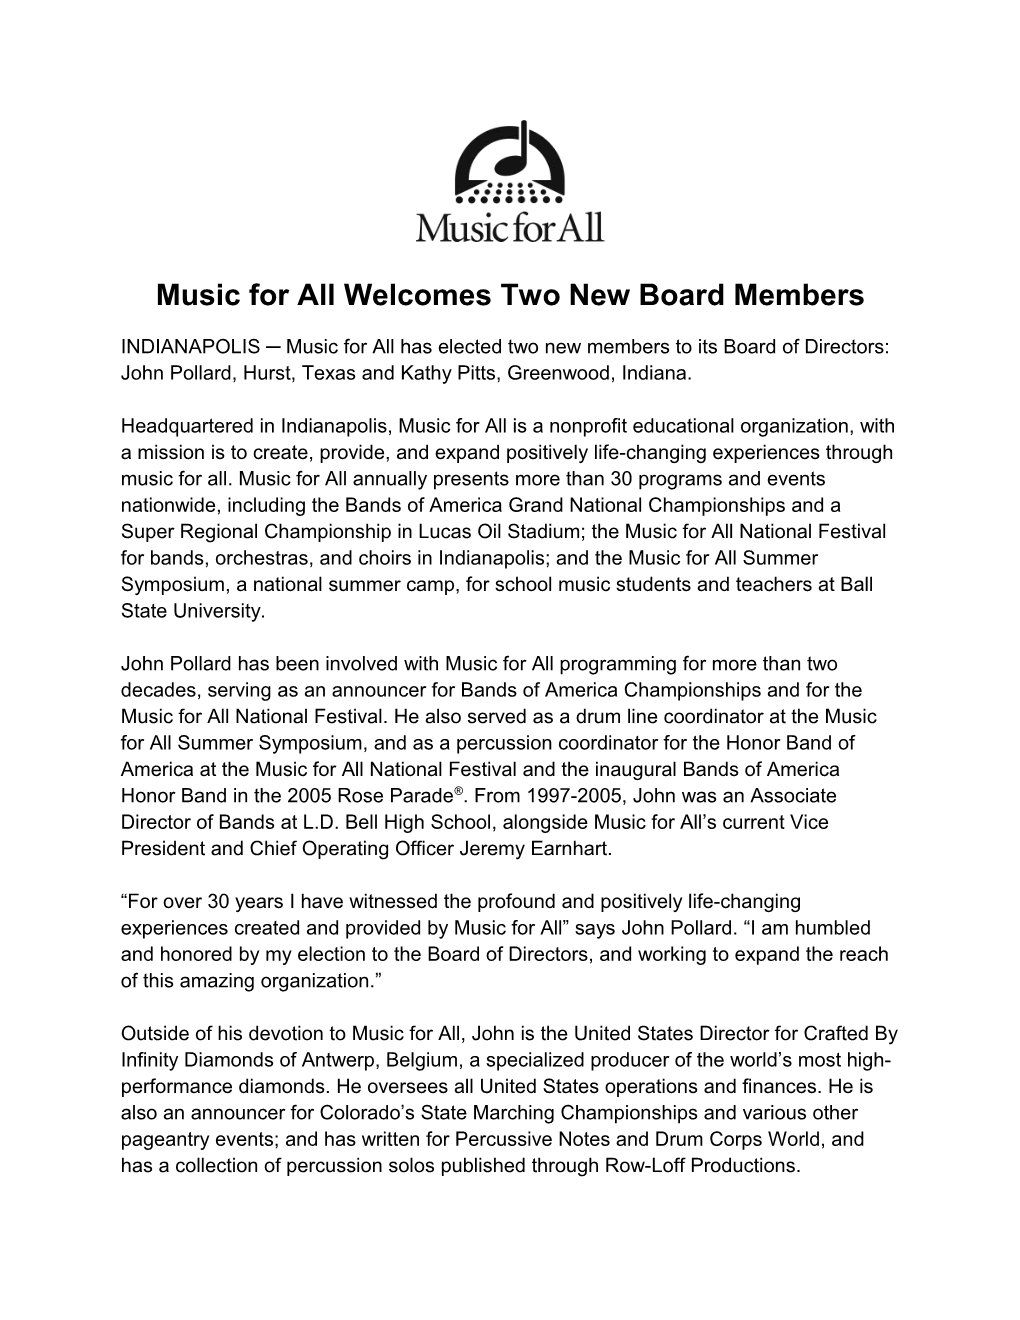 Music for All Welcomes Two Newboard Members